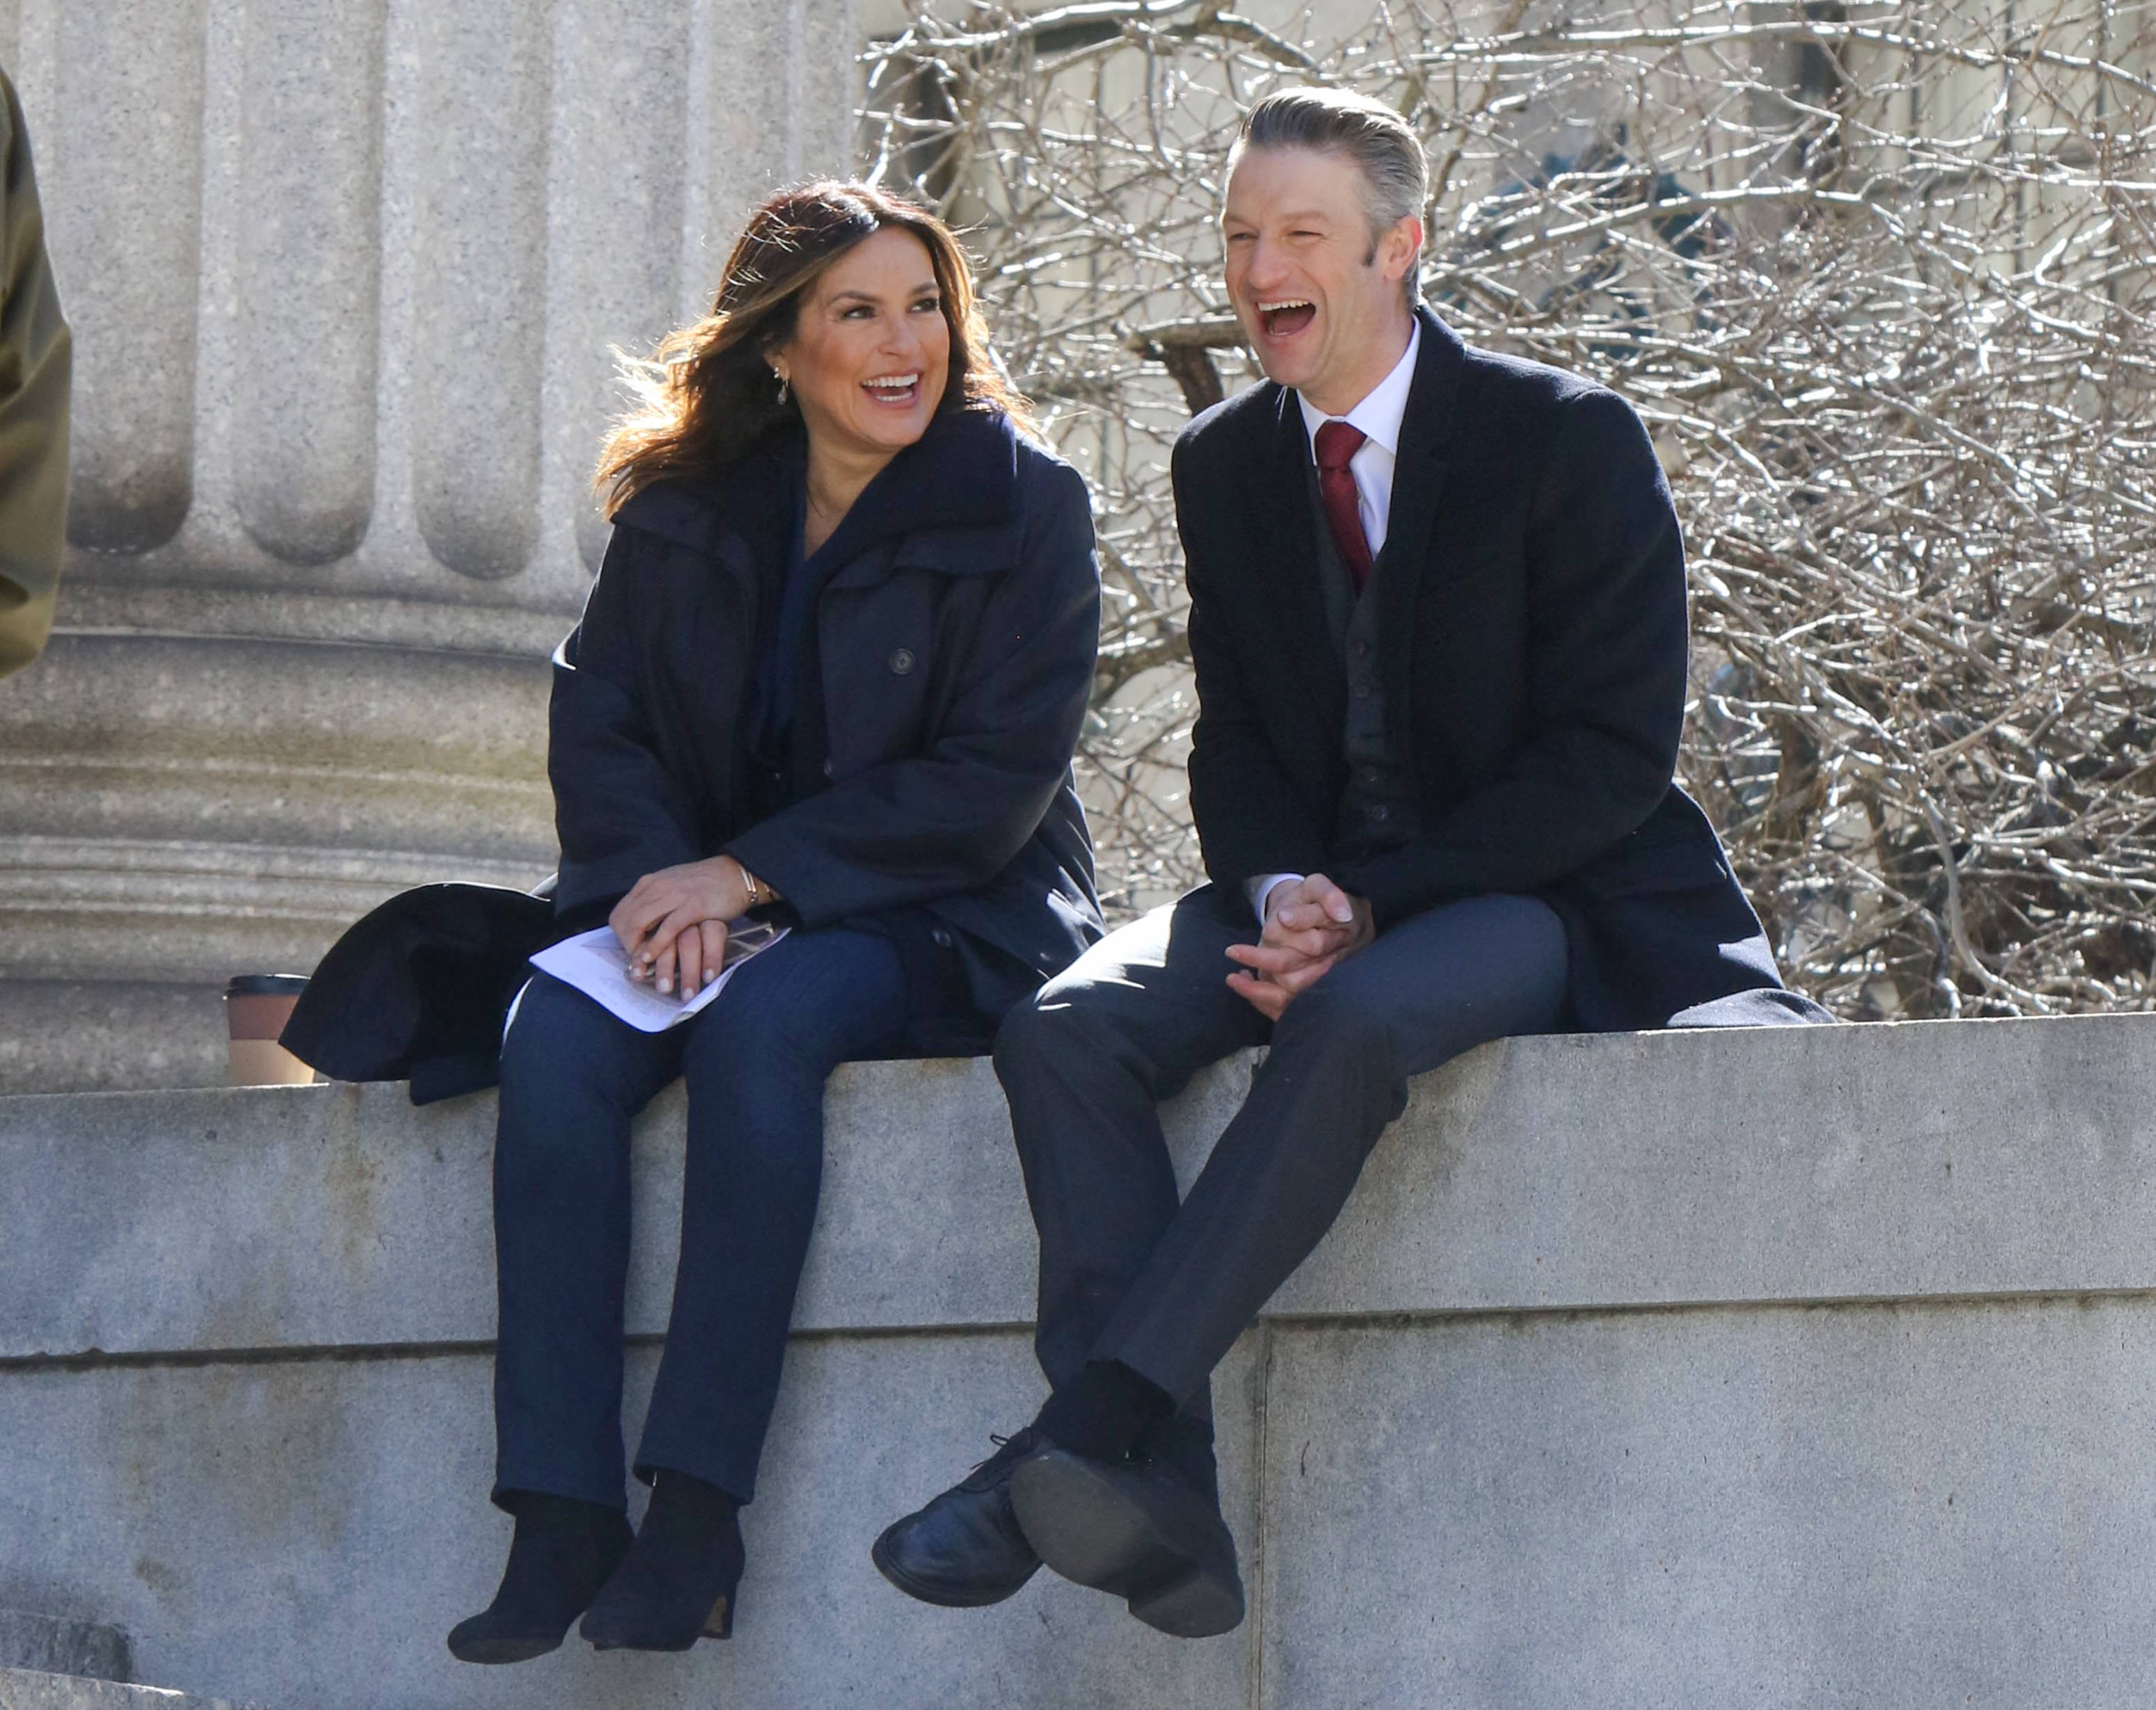 Mariska Hargitay and Peter Scanavino on set of "Law and Order: SVU" in New York City on March 6, 2020 | Photo: Getty Images